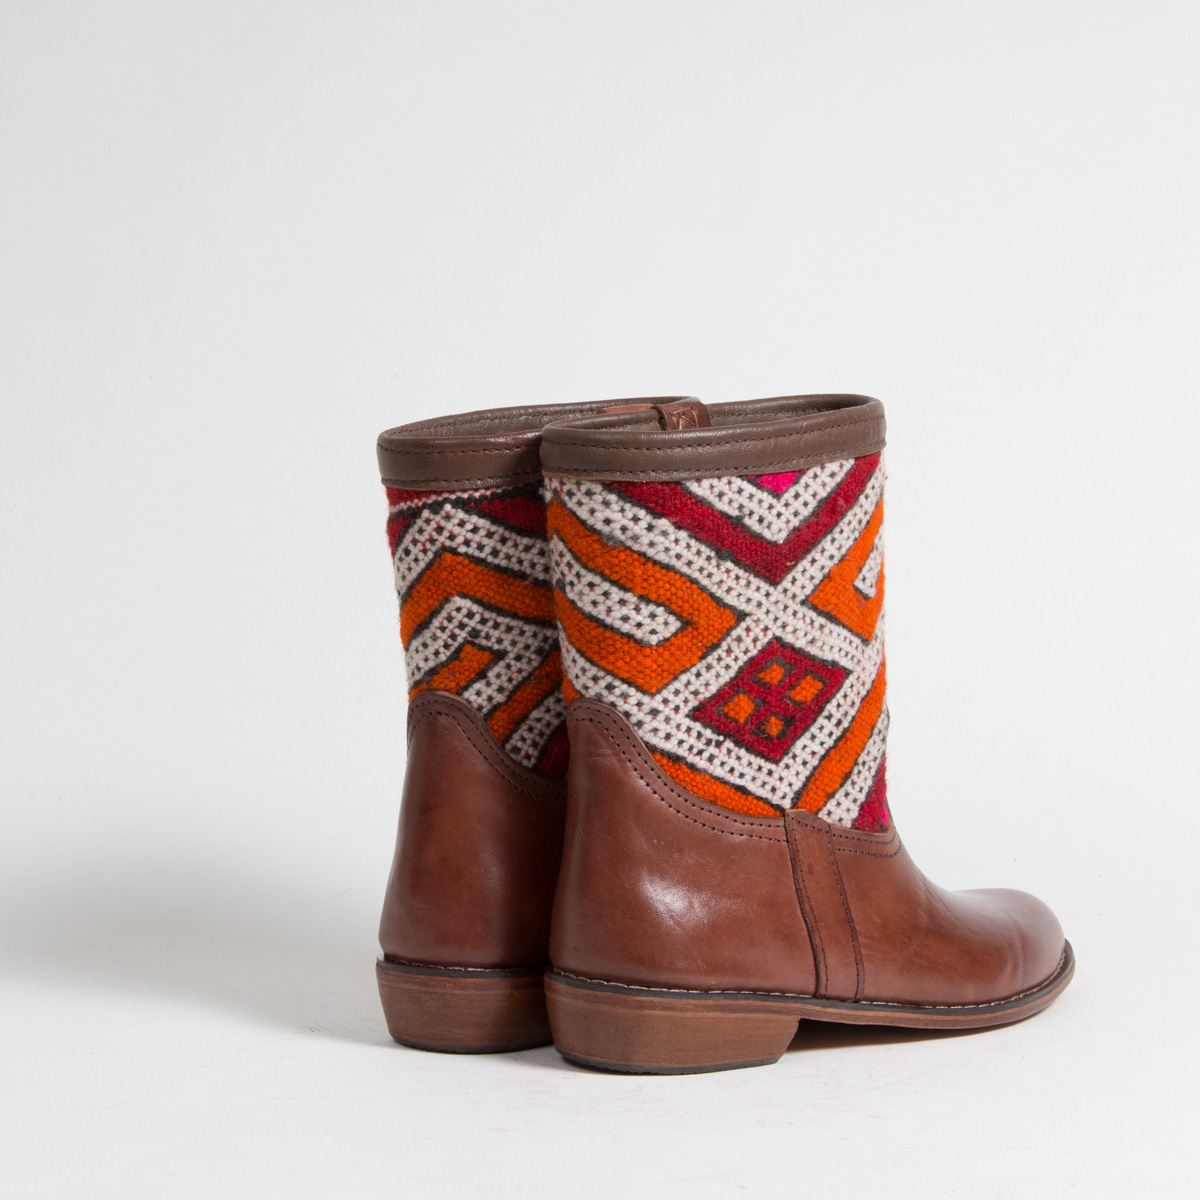 Bottines Kilim cuir mababouche artisanales (Réf. CB2-38)